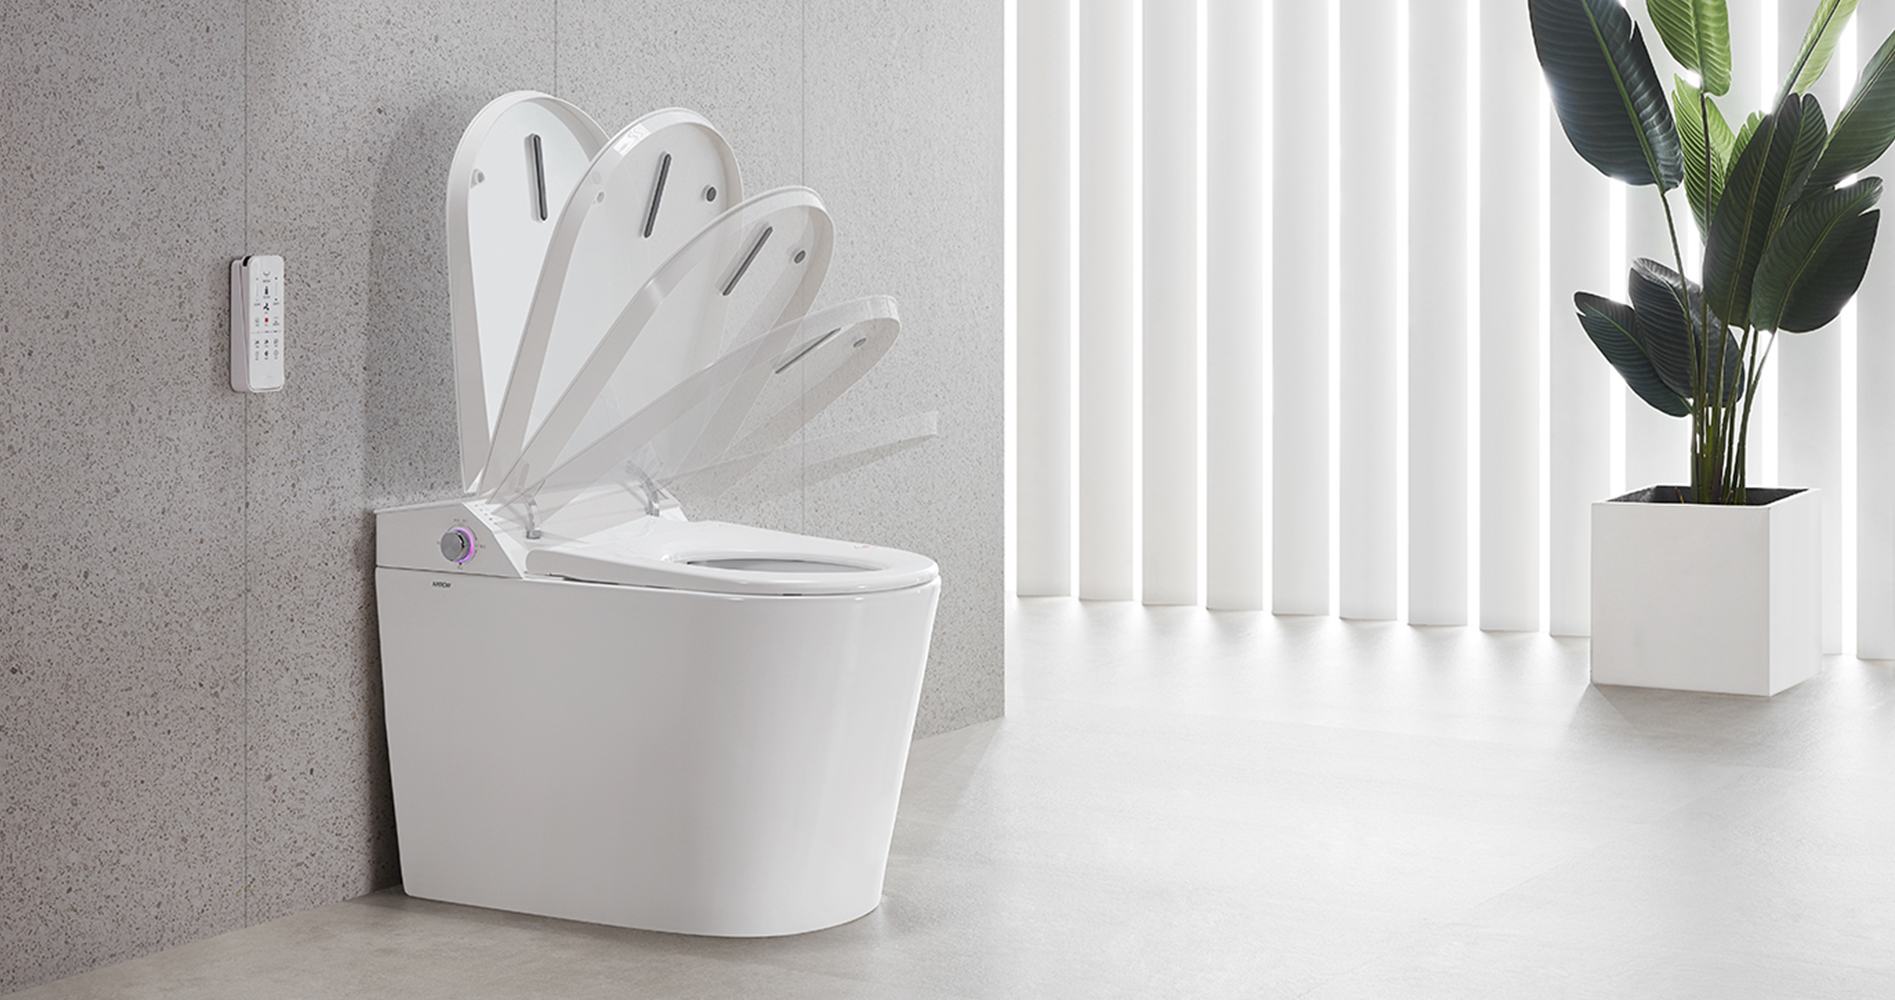 The First Quarter Of The Refined Smart Toilet Brand Share Ranking, Kohler, TOTO, Country Garden Blue Balloon Ranked In The Top Three - Blog - 6